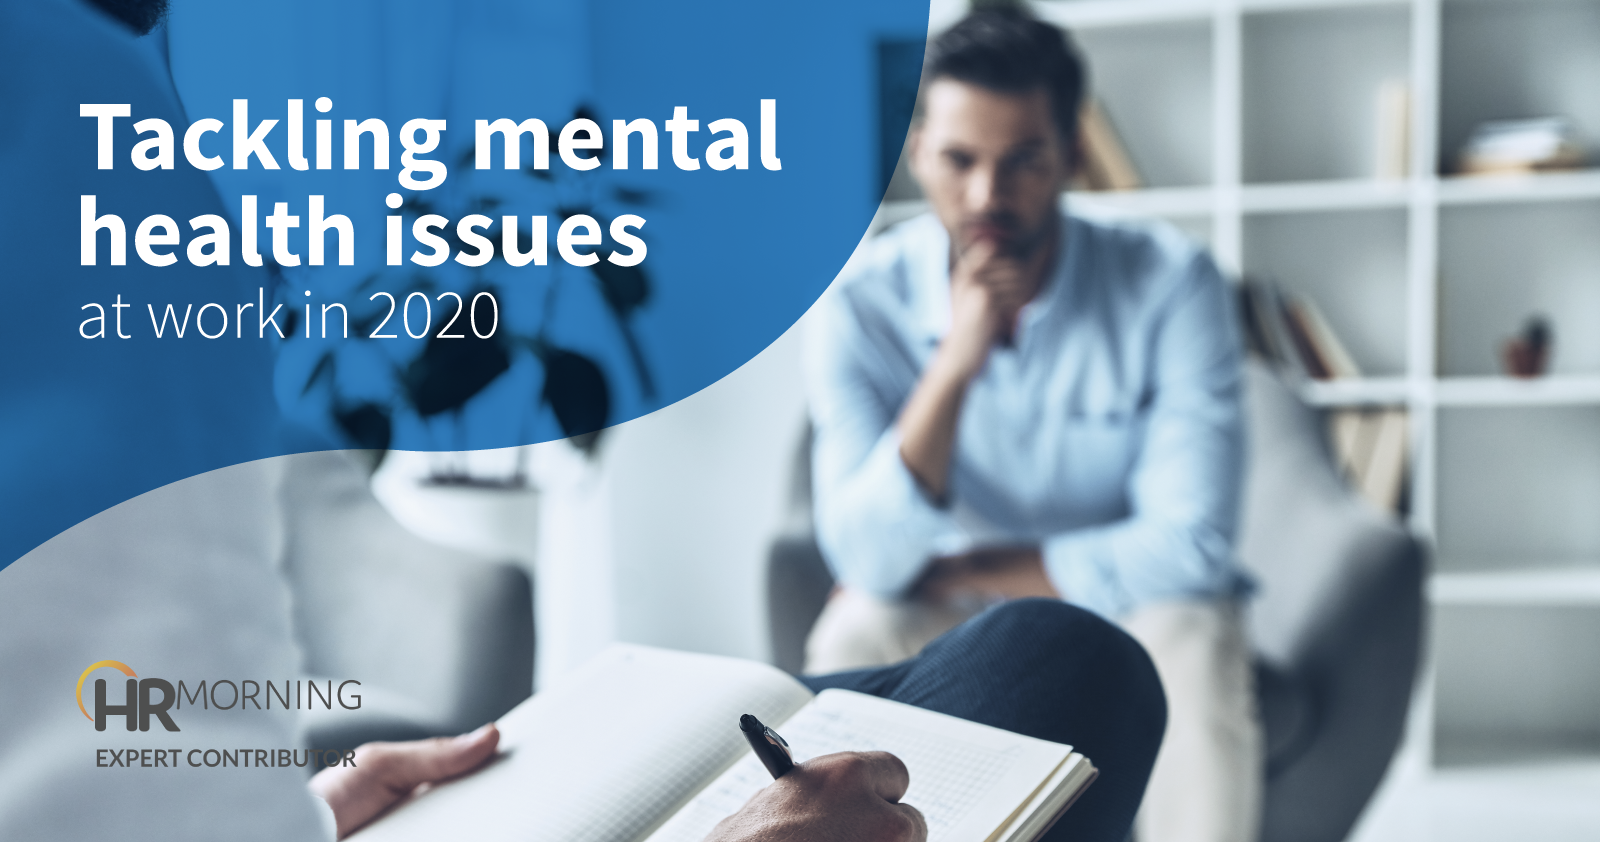 Tackling mental health issues at work in 2020